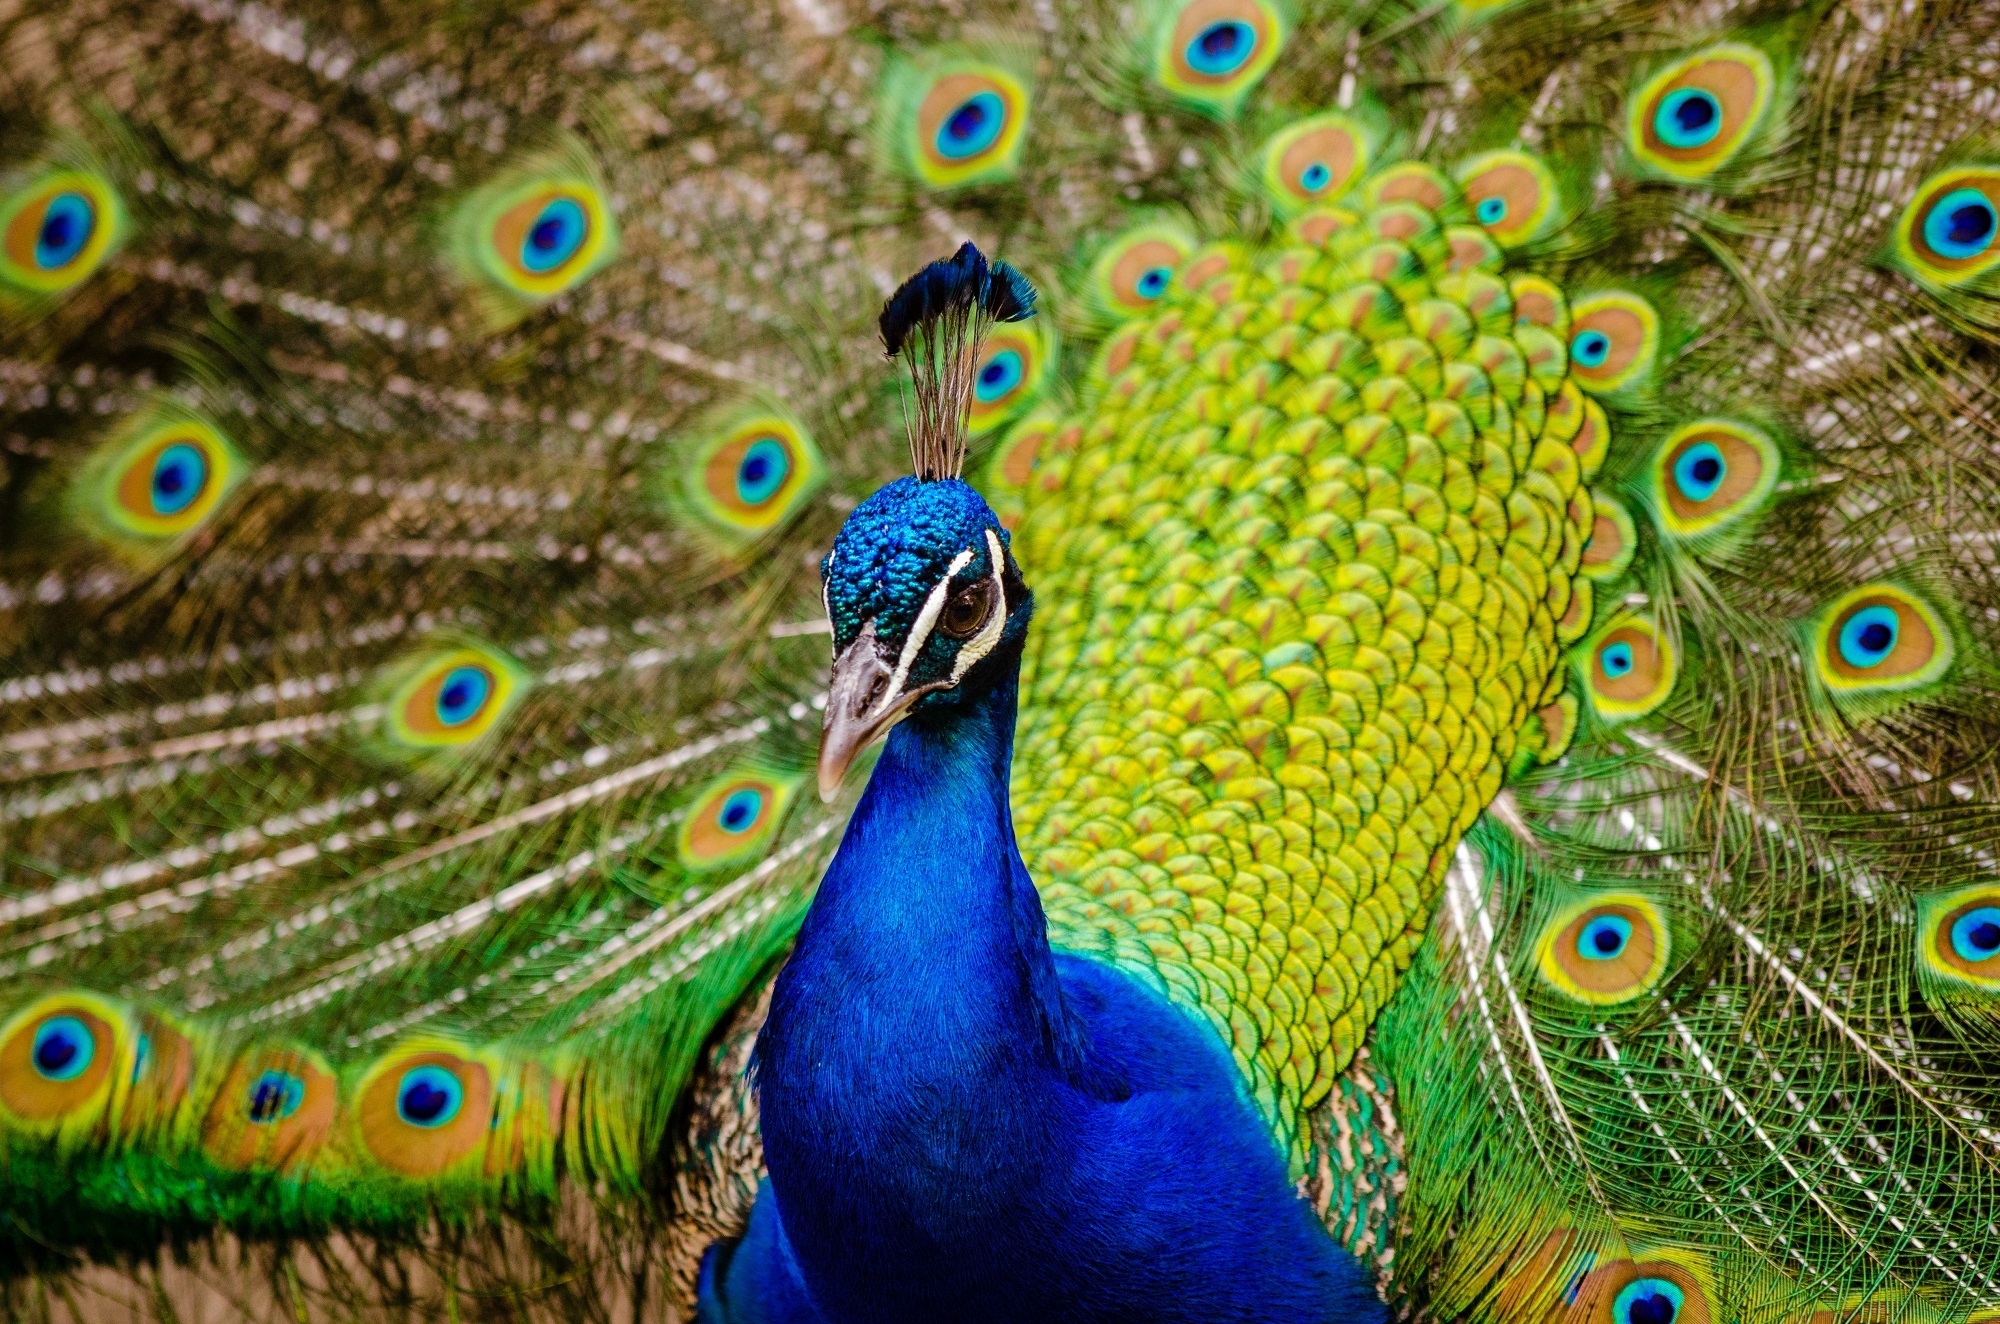 1,000+ Peacock Feather Images & Pictures in HD - Pixabay